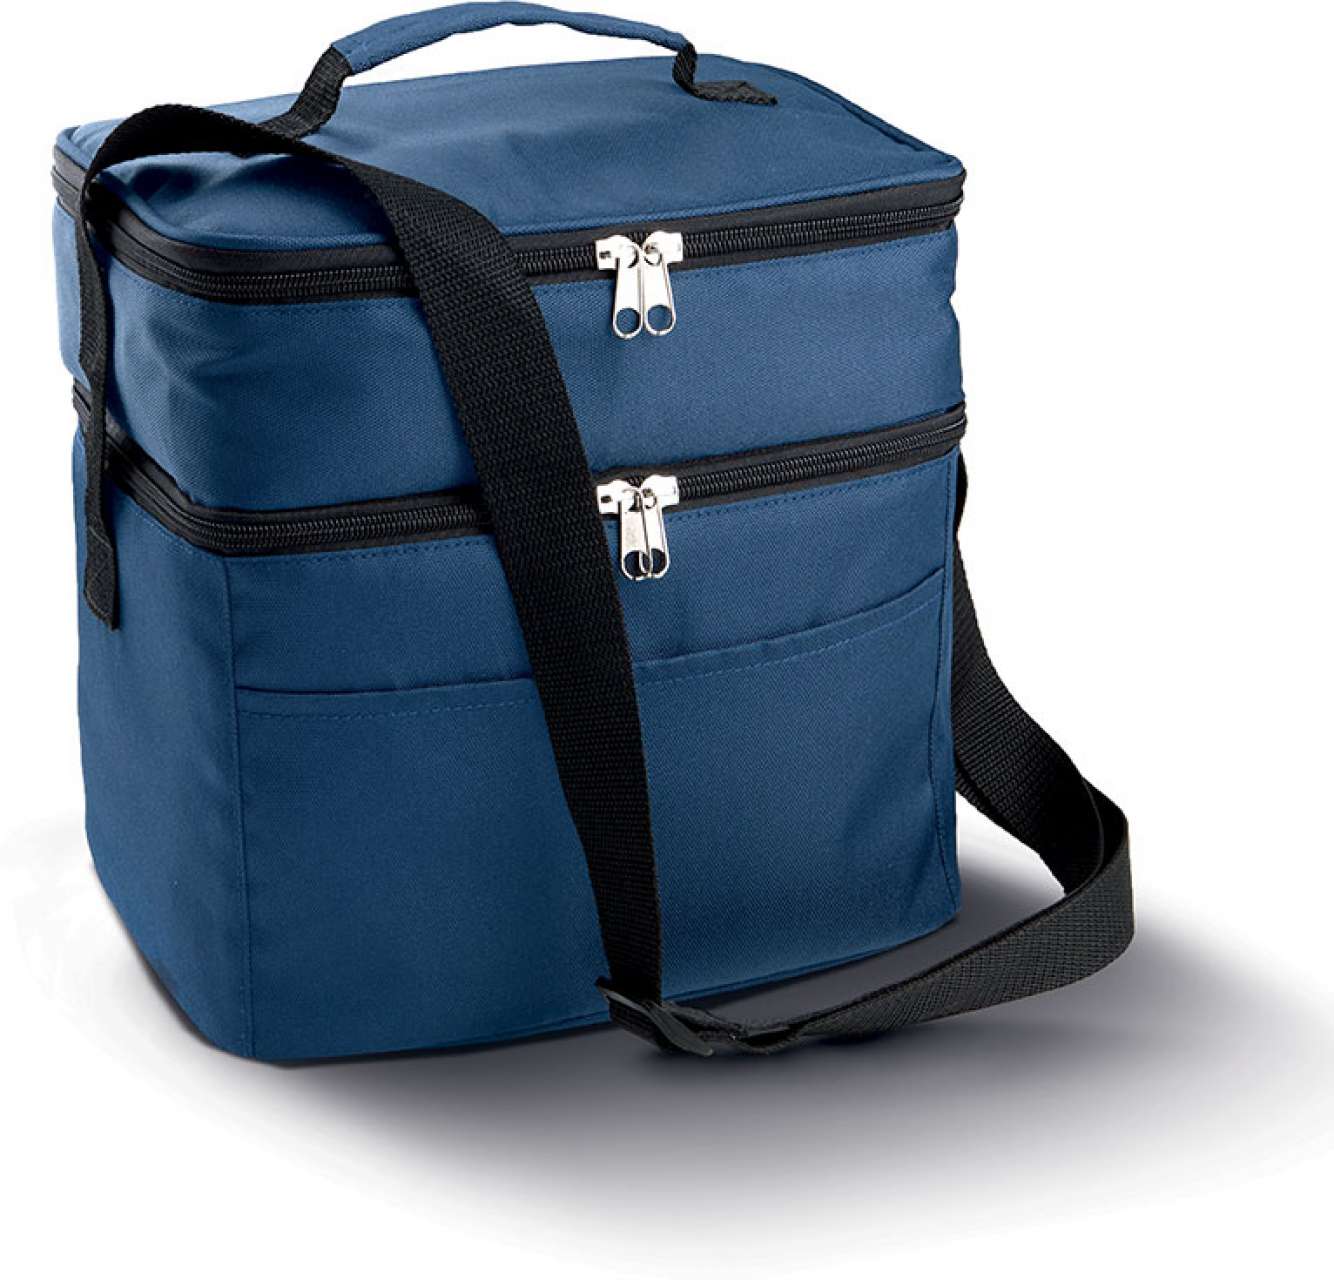 Promo  DOUBLE COMPARTMENT COOLER BAG